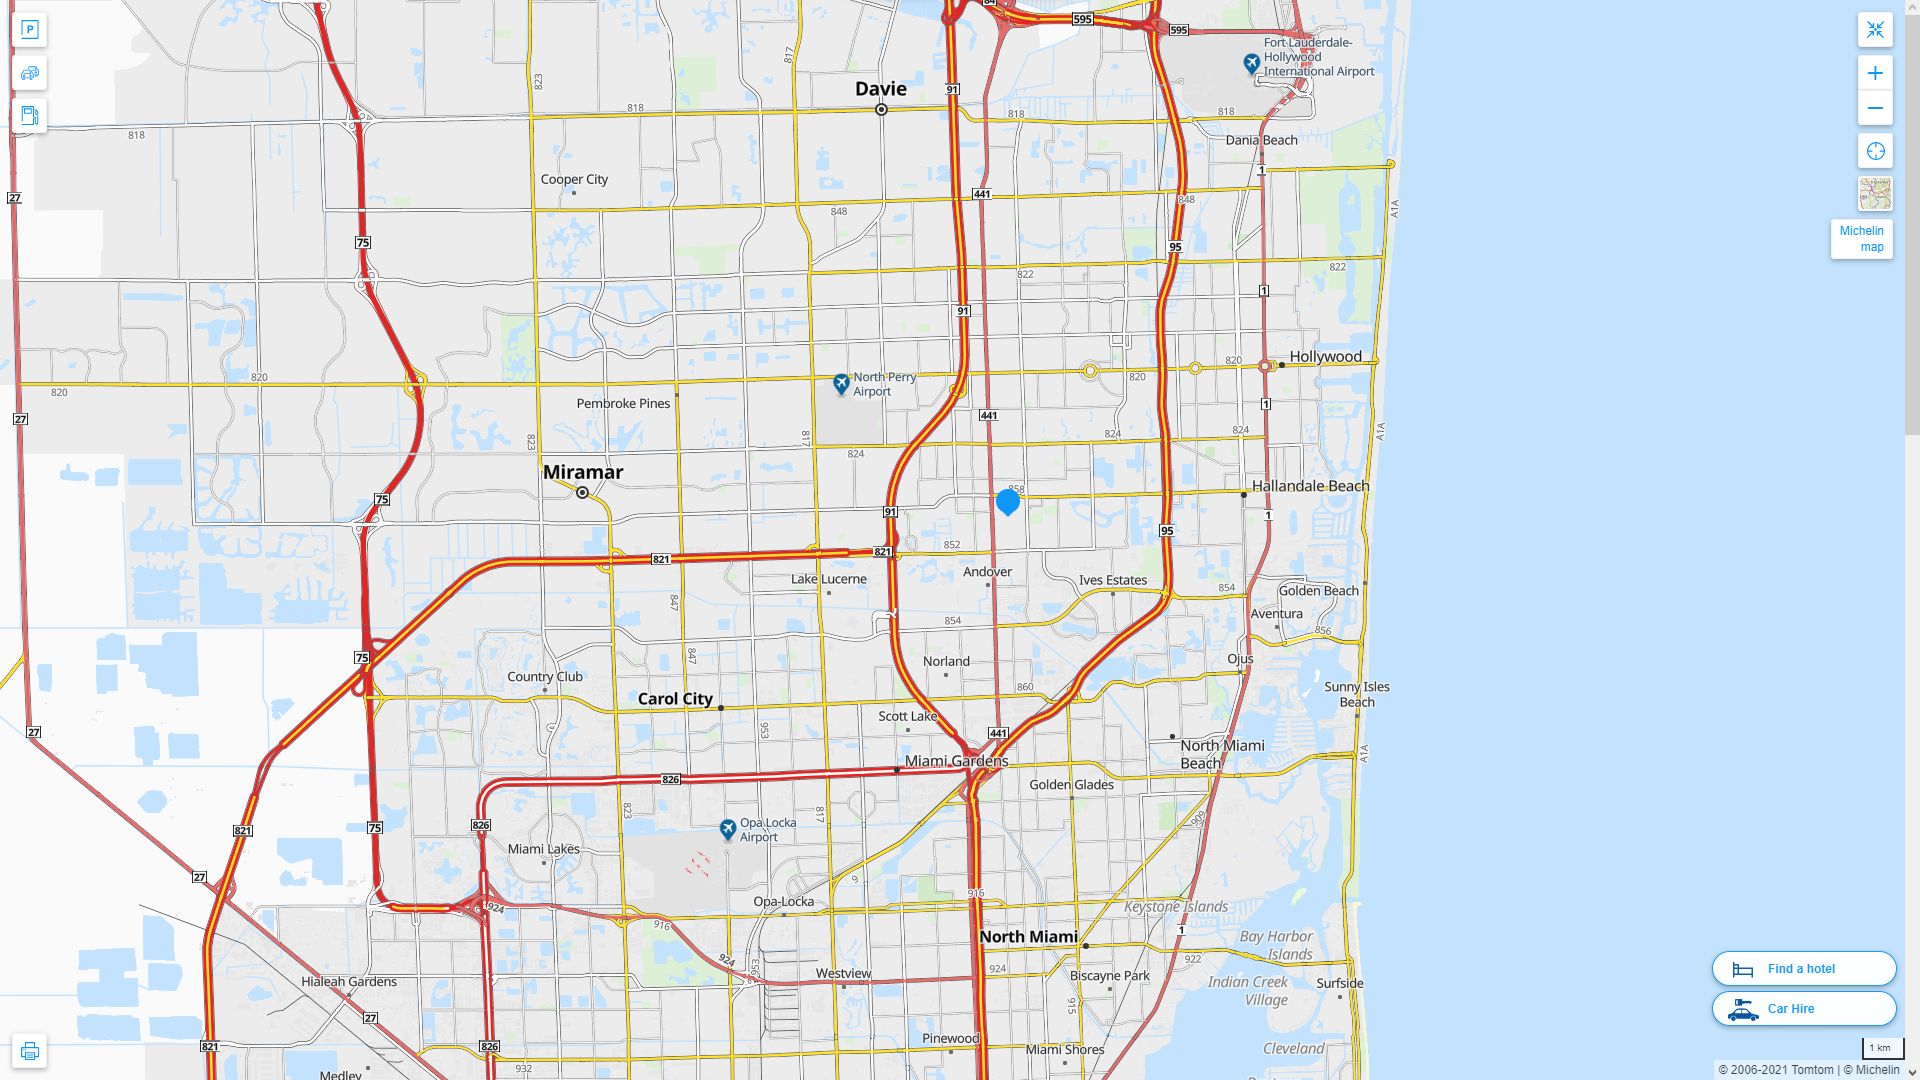 Miami Gardens Florida Highway and Road Map